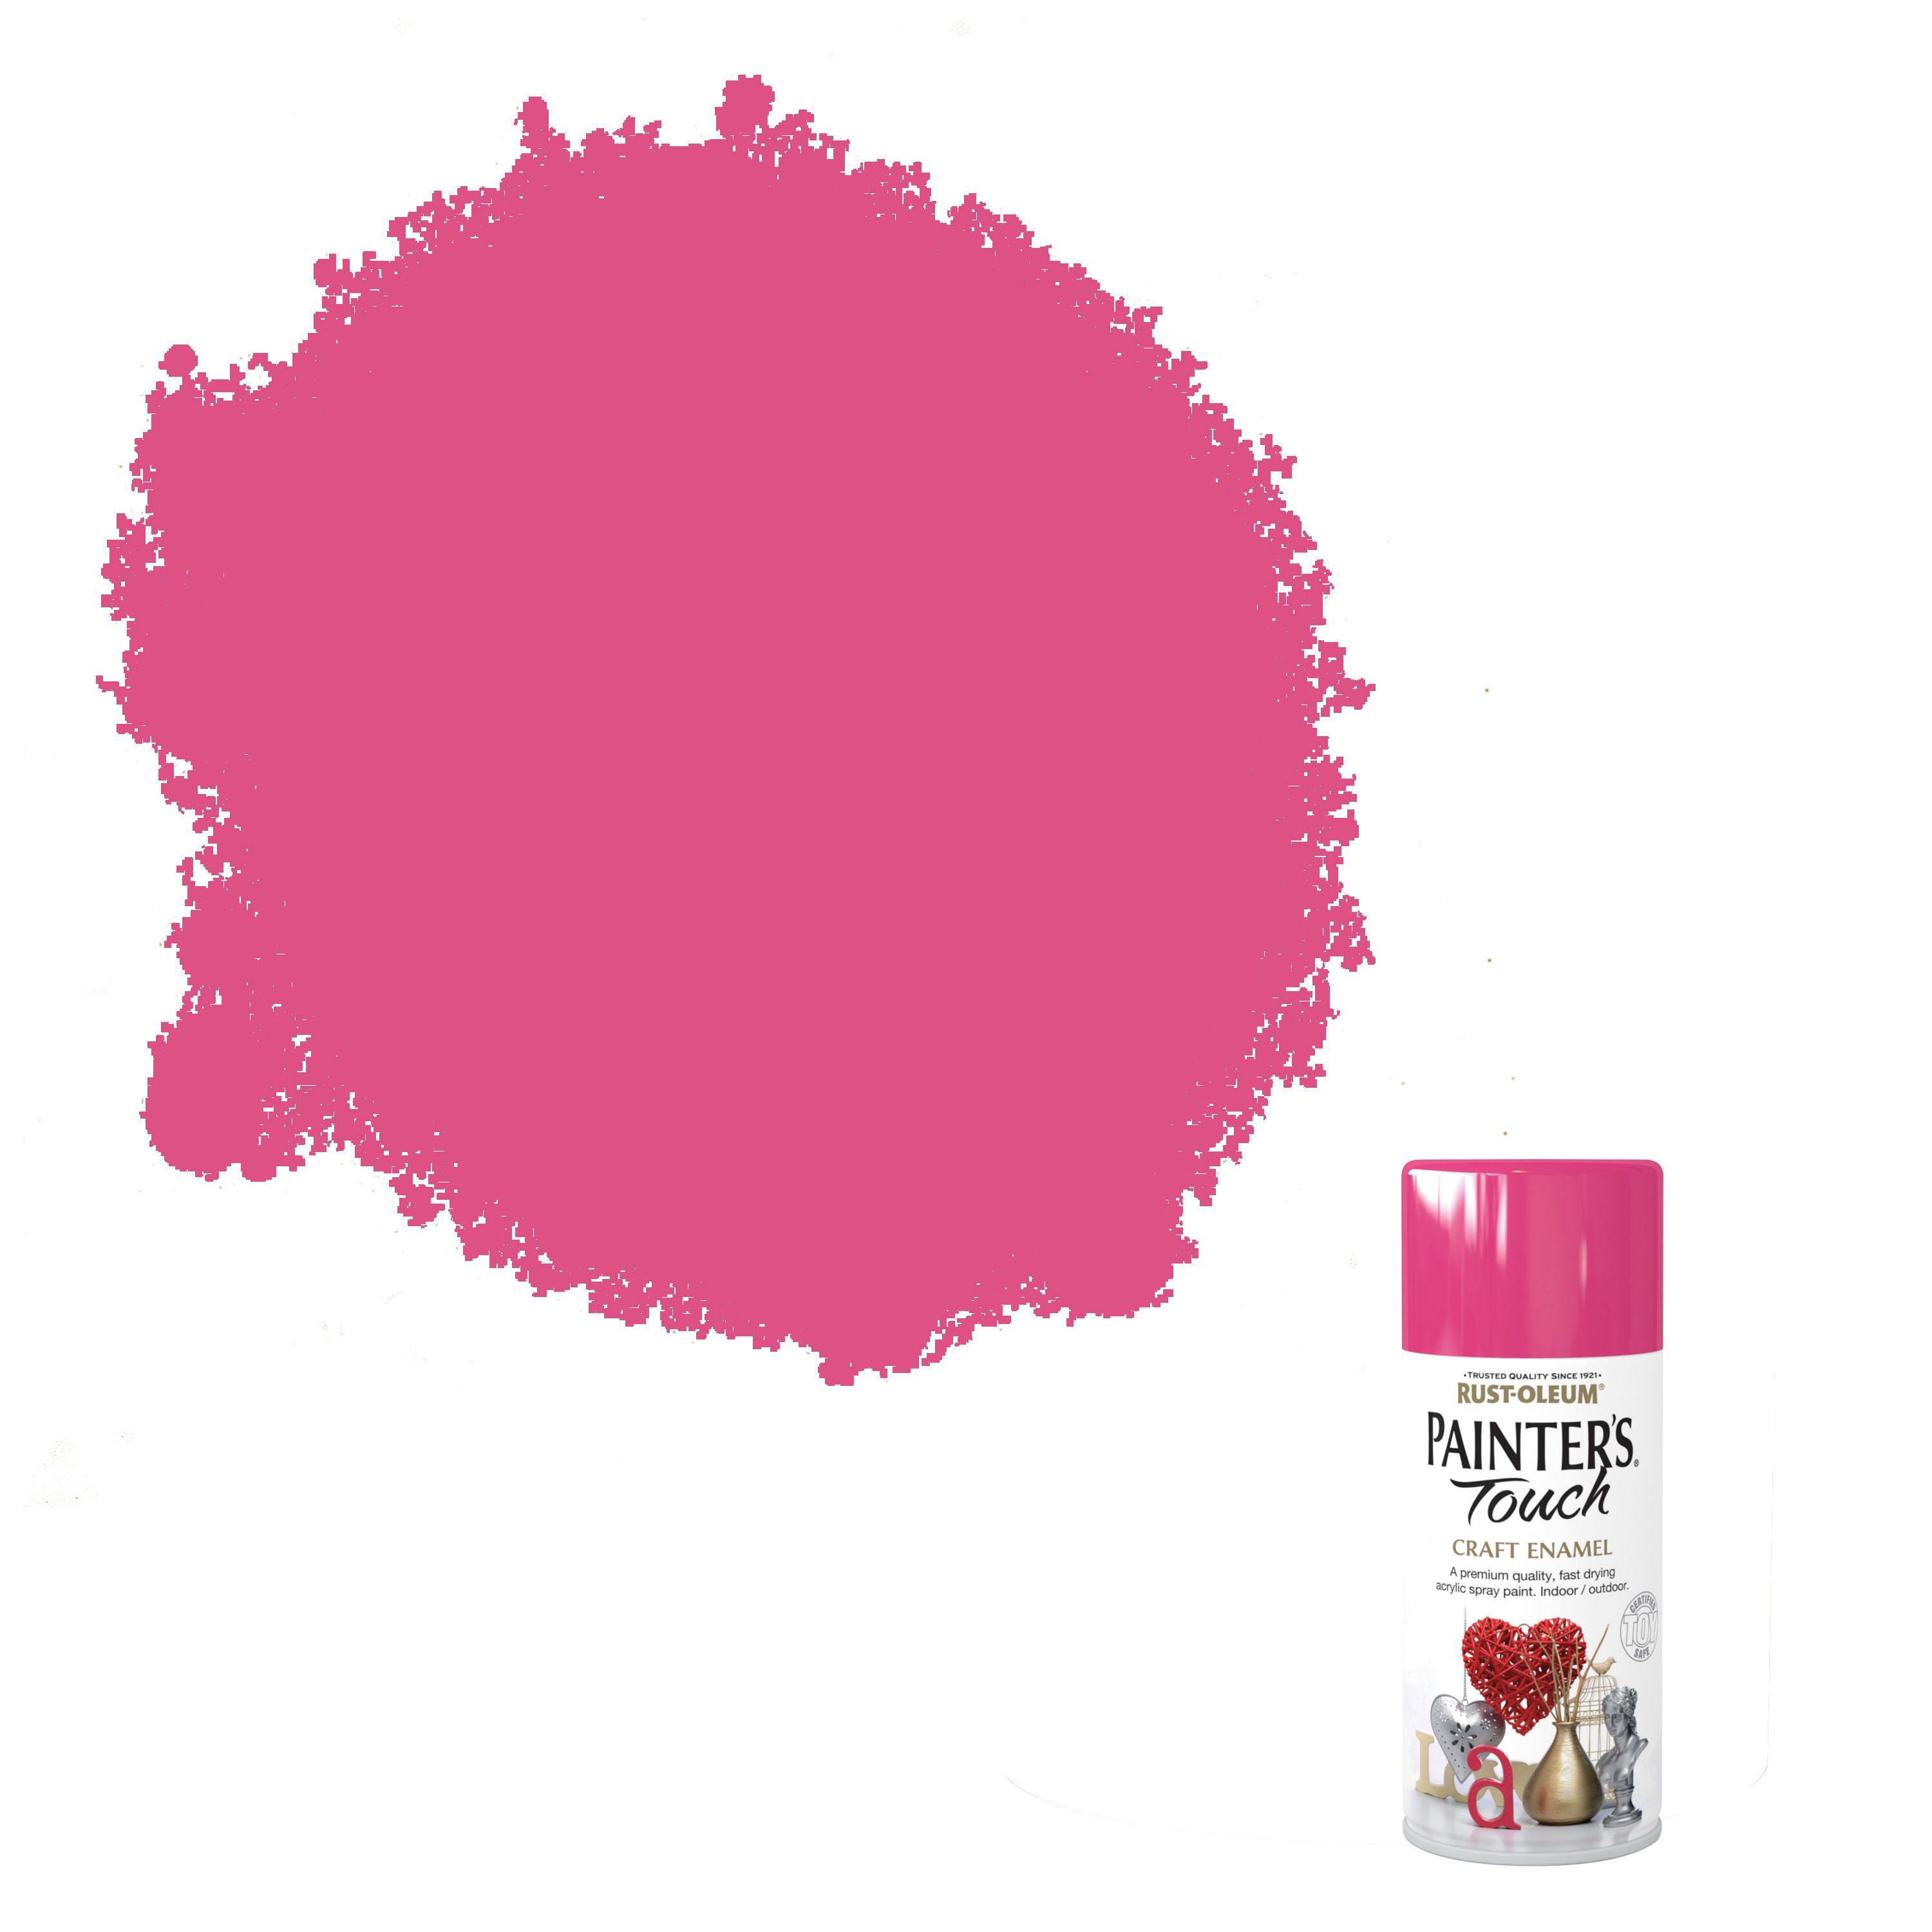 Rust-Oleum Painter's Touch Blossom pink Gloss Multi-surface Decorative spray paint, 150ml